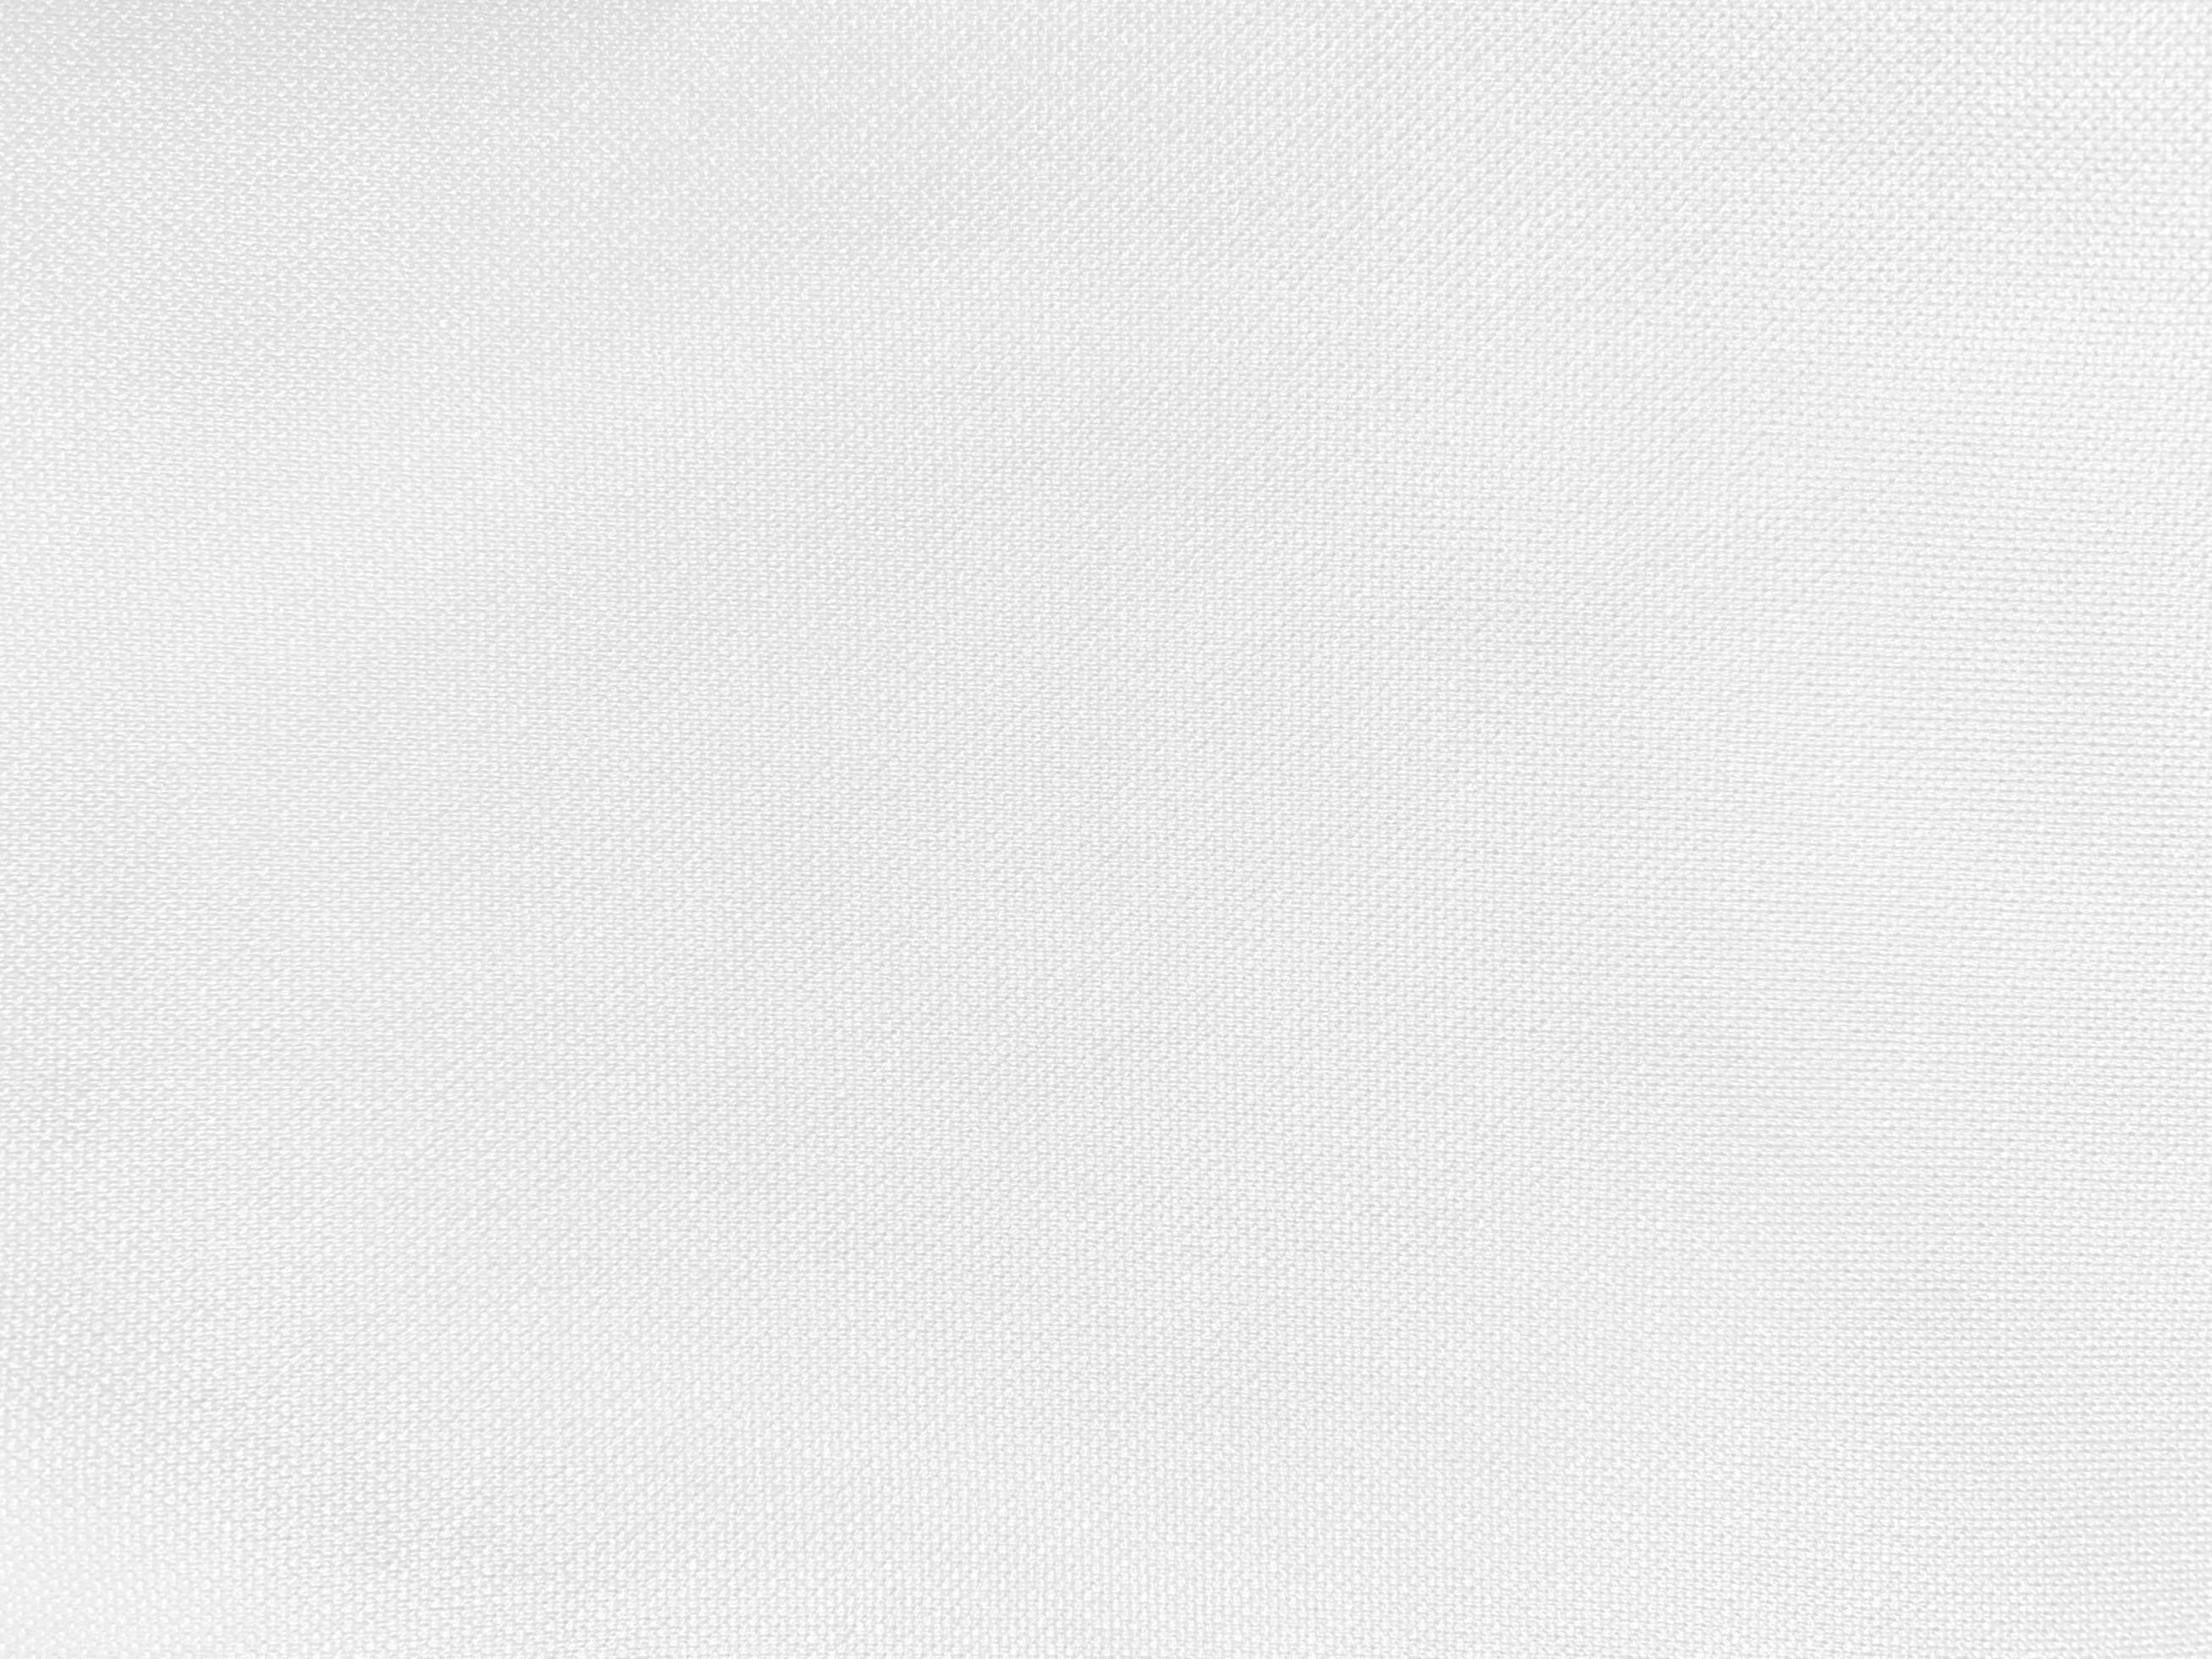 White Fabric Textile Background Seamless Texture Stock Photo by